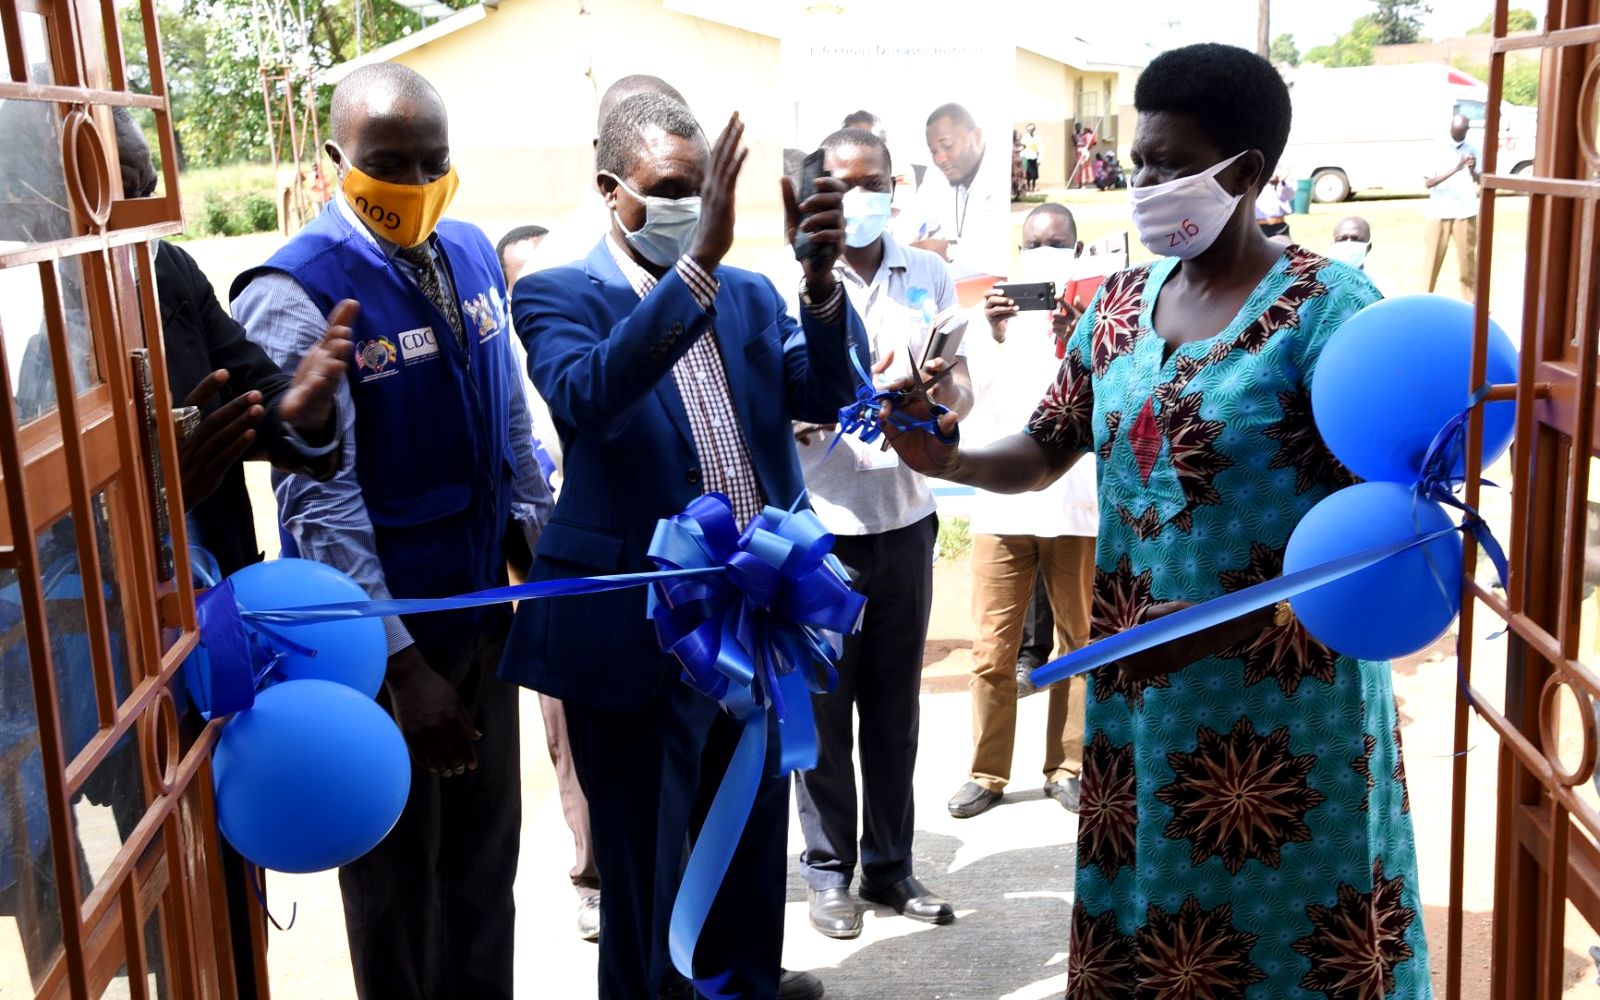 The Deputy RDC Arua, Akello Alice Opio (Right) cuts the tape to unveil the newly renovated ART Clinic at Okollo Health Centre III as the Project Manager-Dr. Twaha Mahaba (Left) and other officials witness on 14th August 2020, Madi-Okolo, Arua District, Uganda. Photo credit: IDI